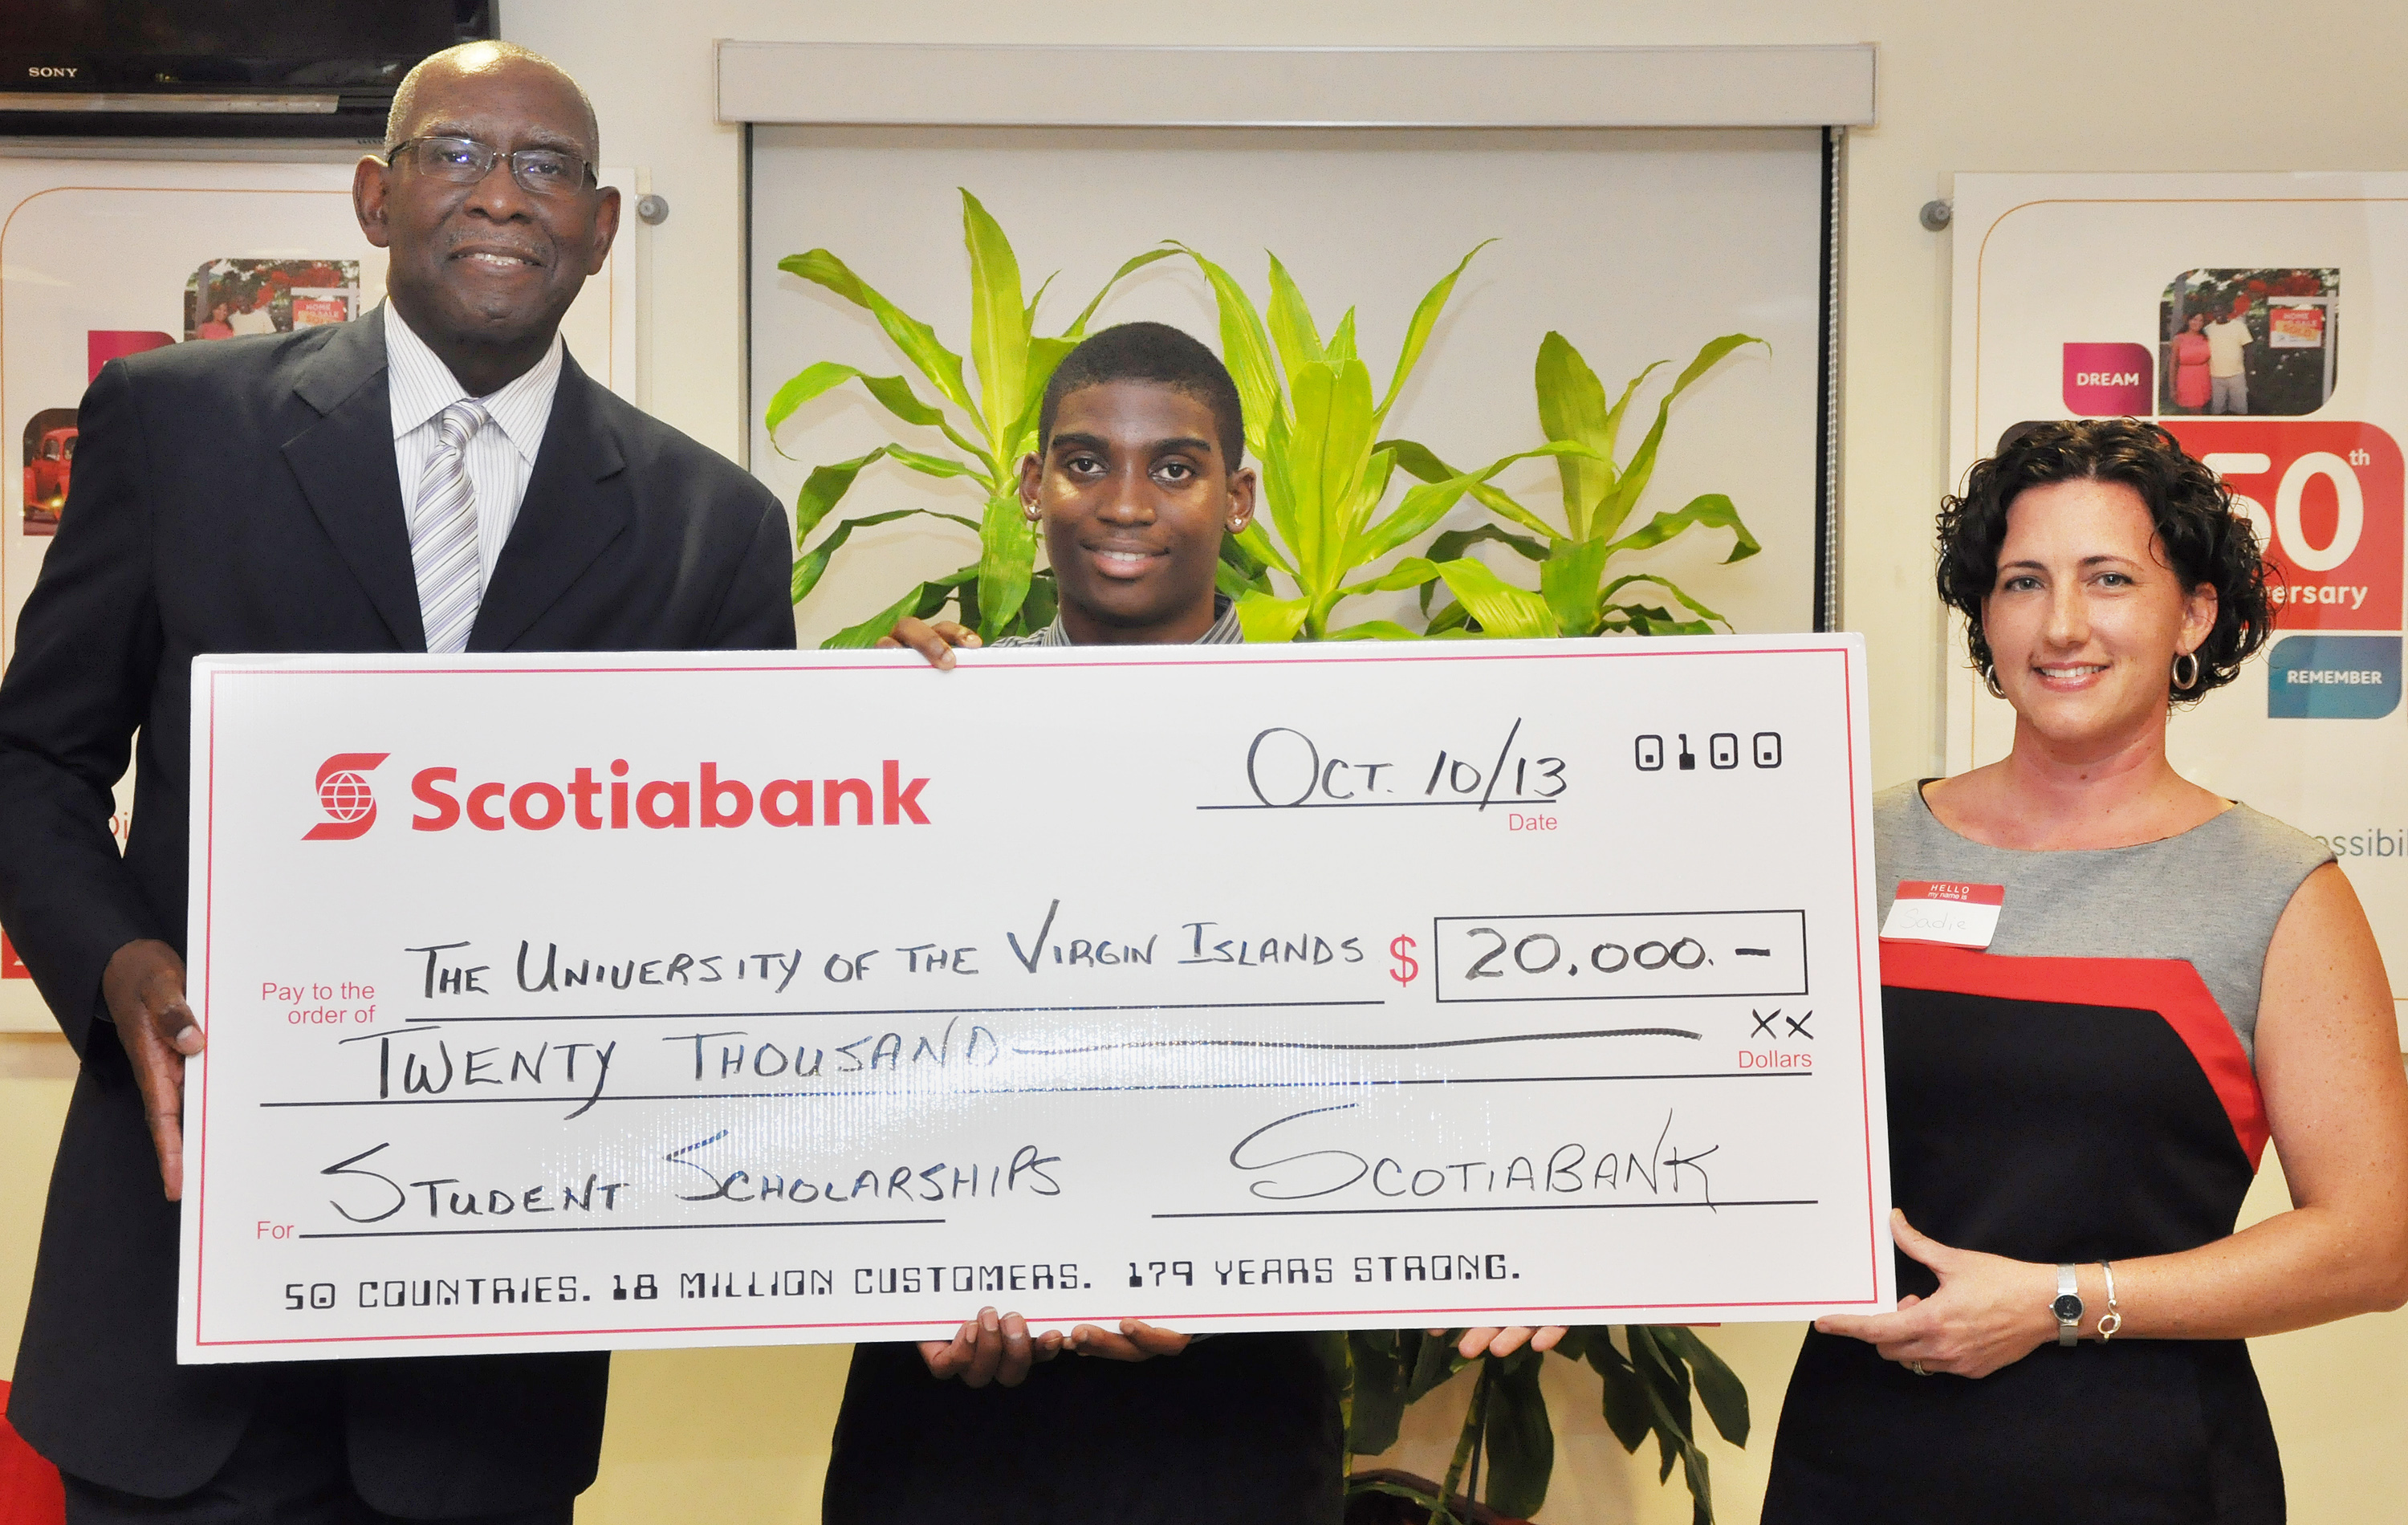 On hand for Scotiabank’s presentation of a check for $20,000 to the UVI Scholarship Fund were, from left, UVI President Dr. David Hall, student scholarship recipient Devon Williams and Scotiabank Marketing Manager Sadie Taylor-Clendinen. 